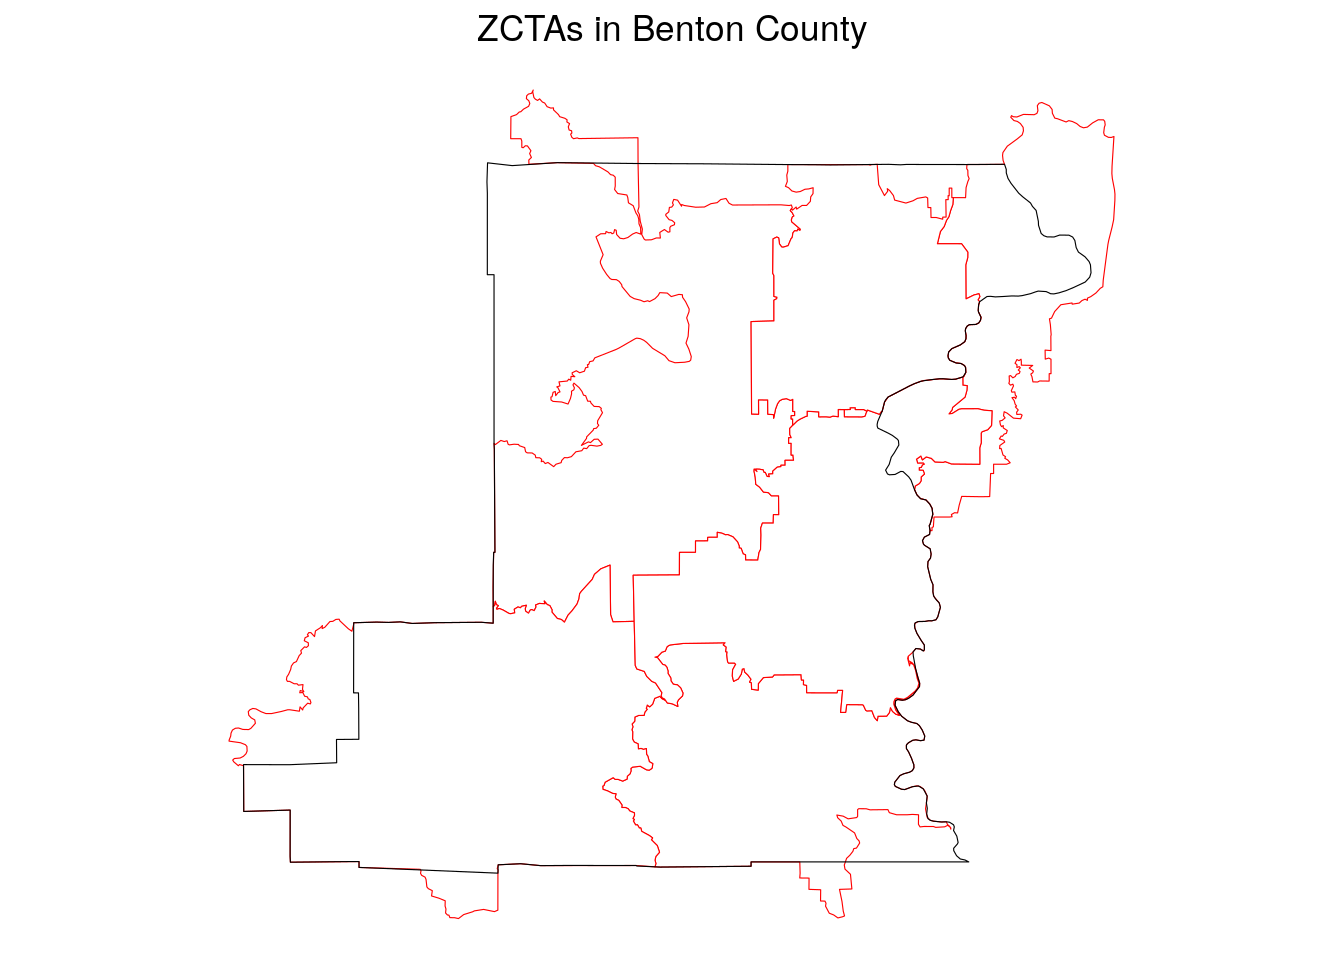 Benton County, OR ZCTAs in relationship to the county boundary